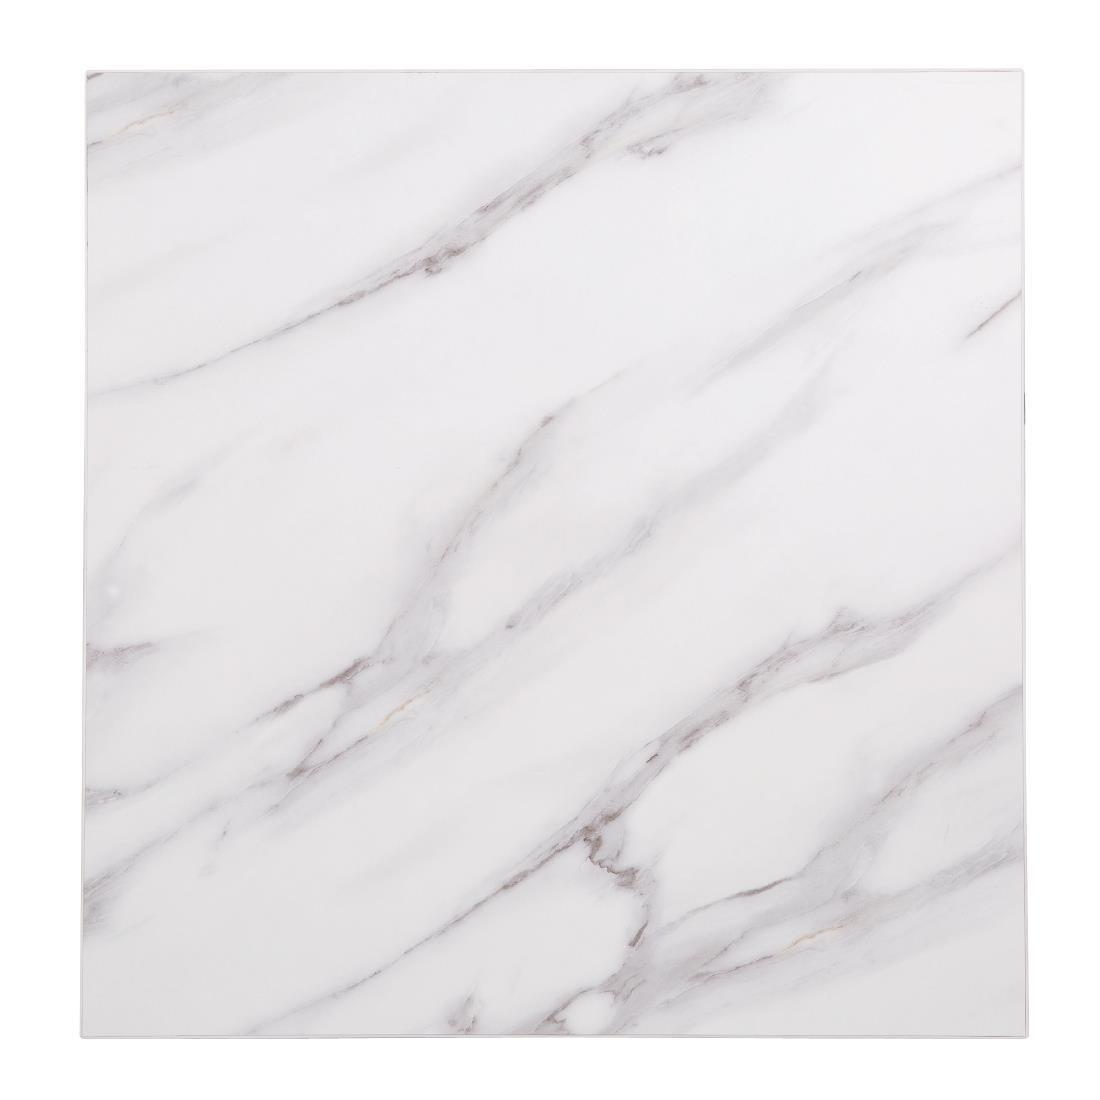 Bolero Pre-Drilled Square Table Top Marble Effect 600mm - DT444  - 2